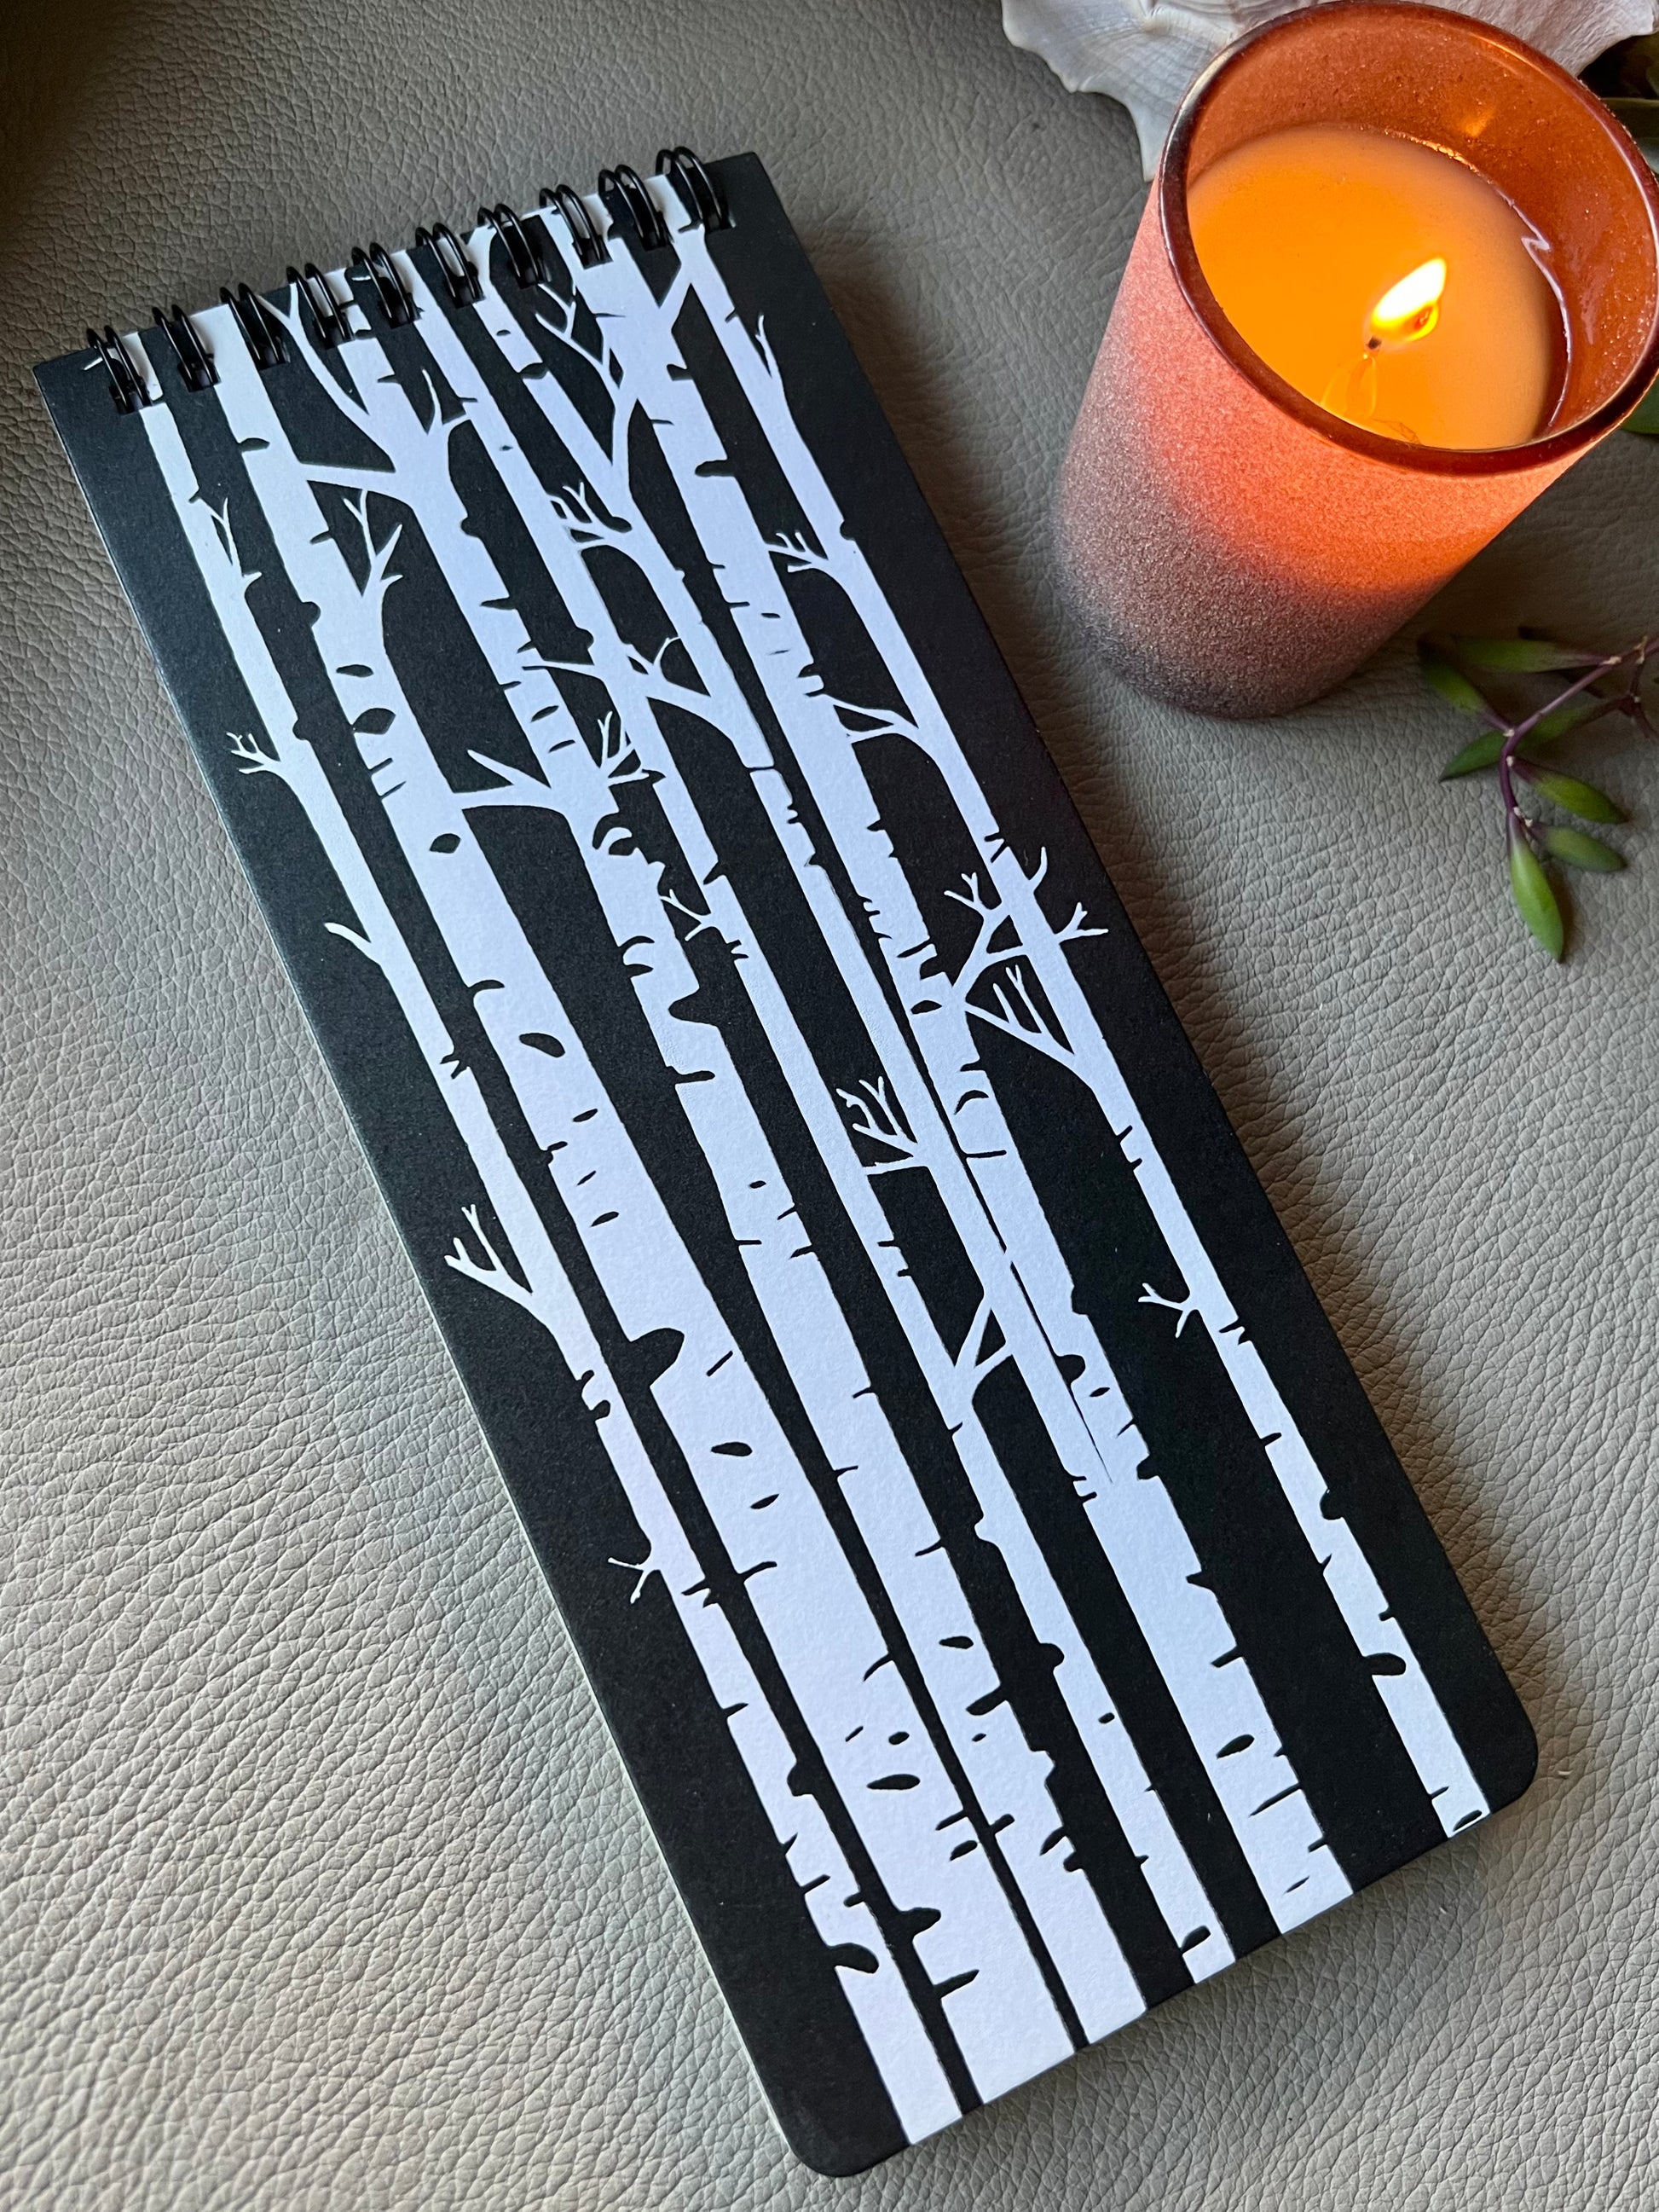 Black and white aspen trees printed on notebook